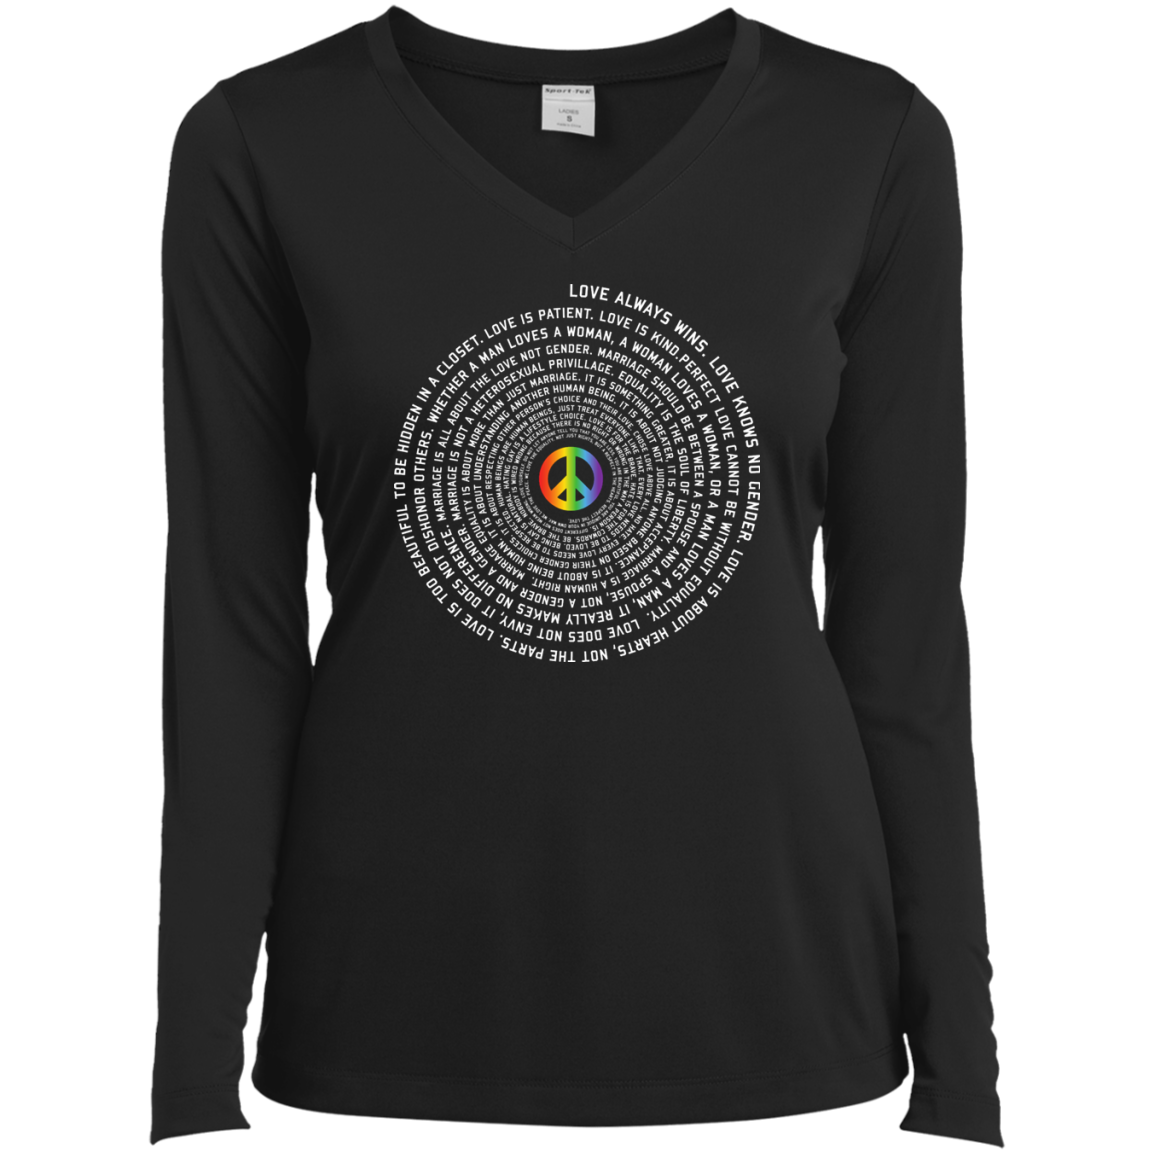 "Pride Month Peace" Special full sleeves womensShirt LGBT Pride Black full sleeves tshirt for women